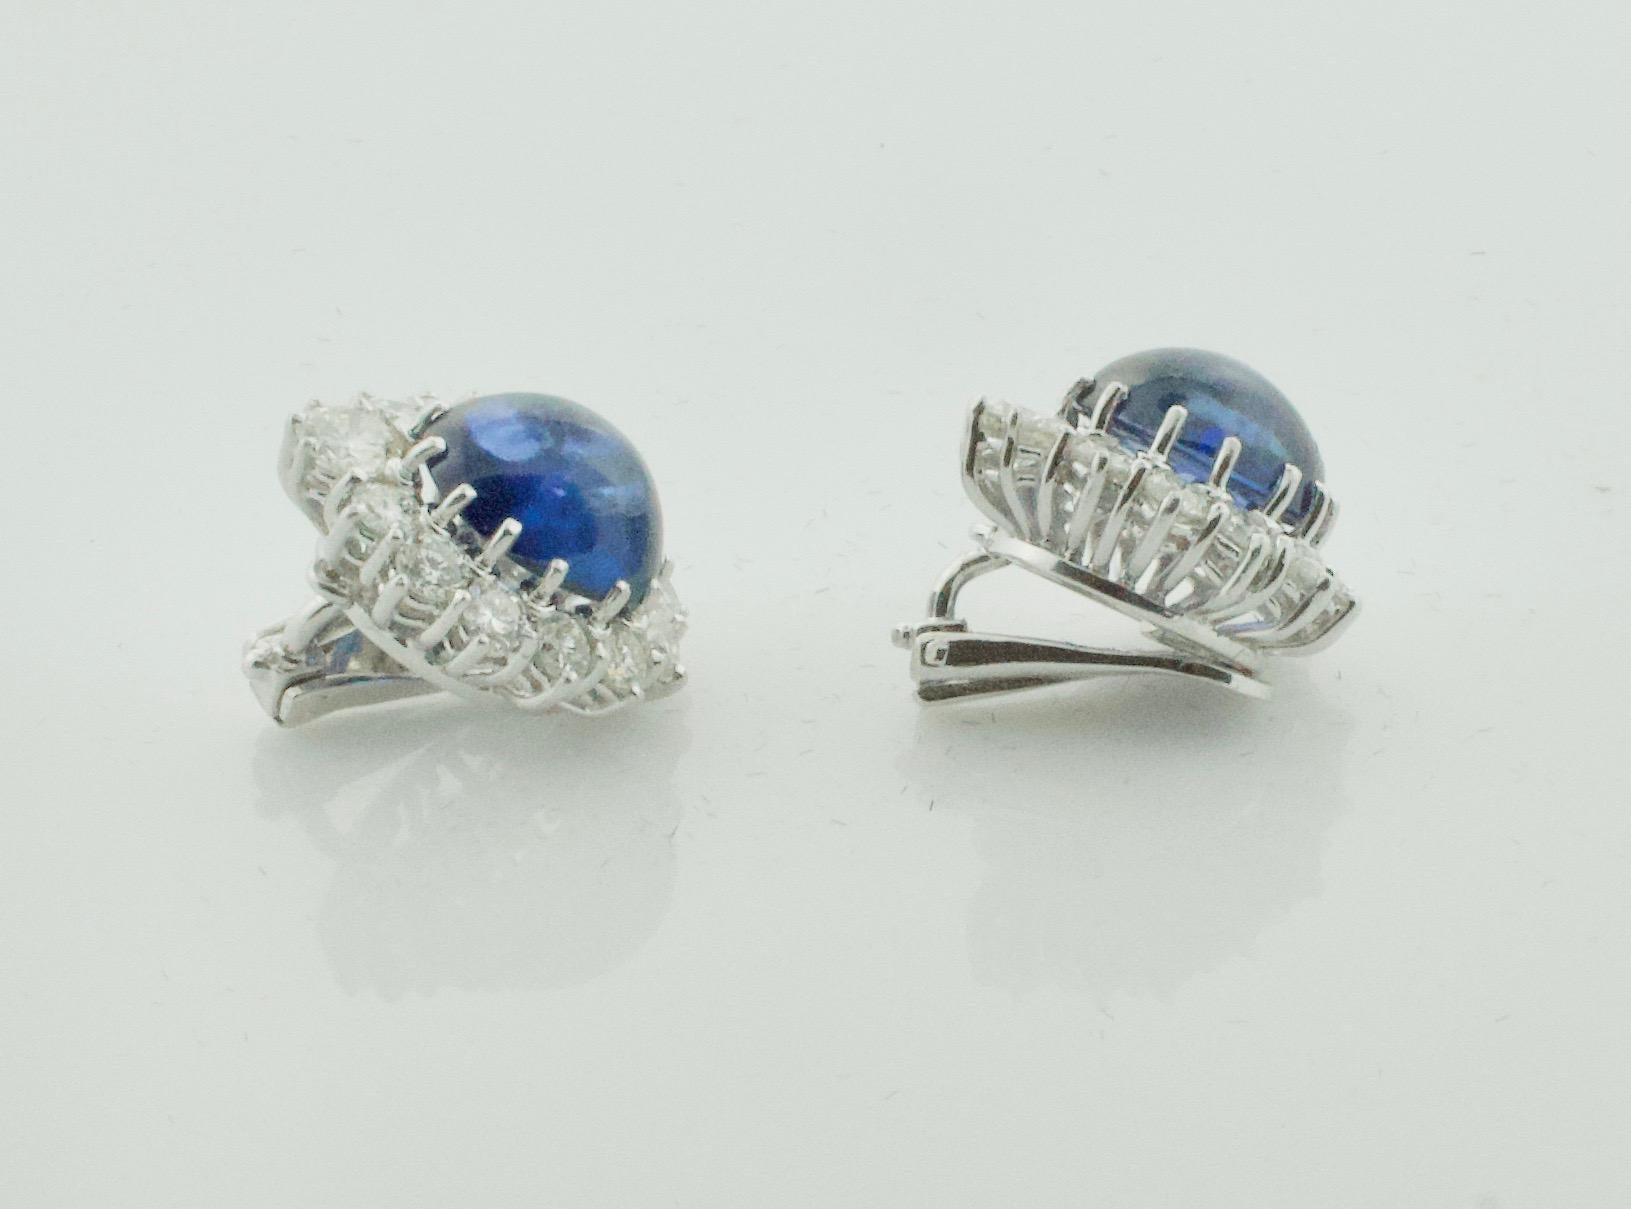 Beautiful Cabochon Sapphire and Diamond Clip Earrings in Platinum
Two Cabochon Sapphires weigh 15.00 carats [bright with no imperfections visible to the naked eye]
Two Round Brilliant Cut Diamonds weighing .65 carats approximately
Twenty Four Round